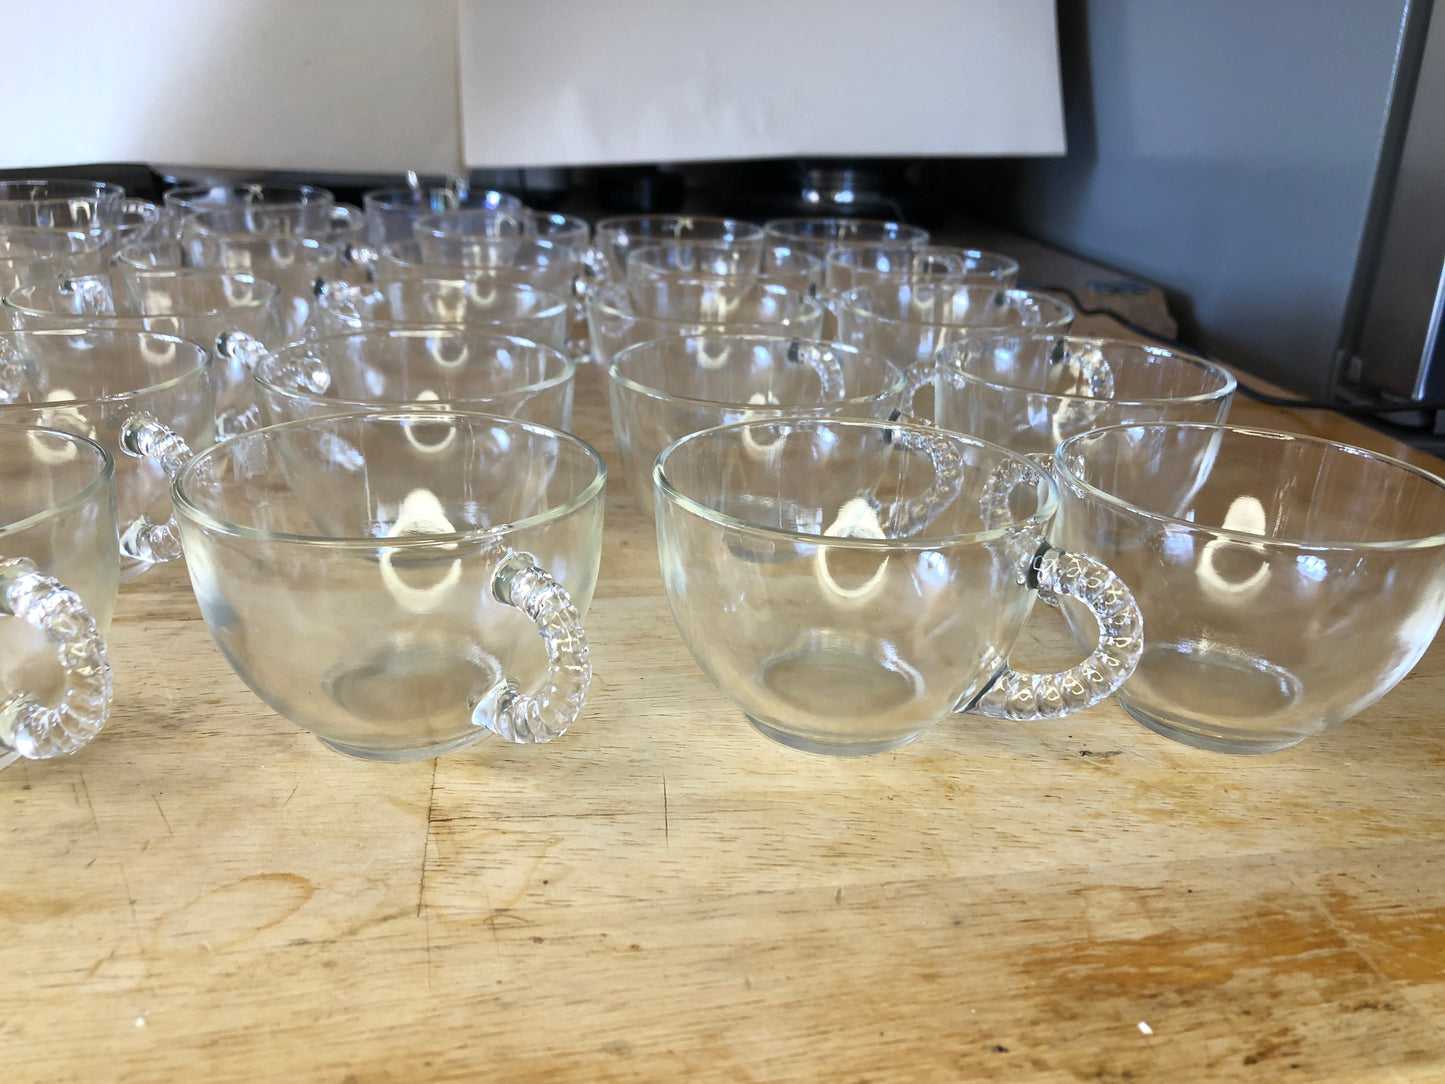 Set of 43 Vintage Libby Punch Bowl Glasses with Rope Handle - Excellent Condition